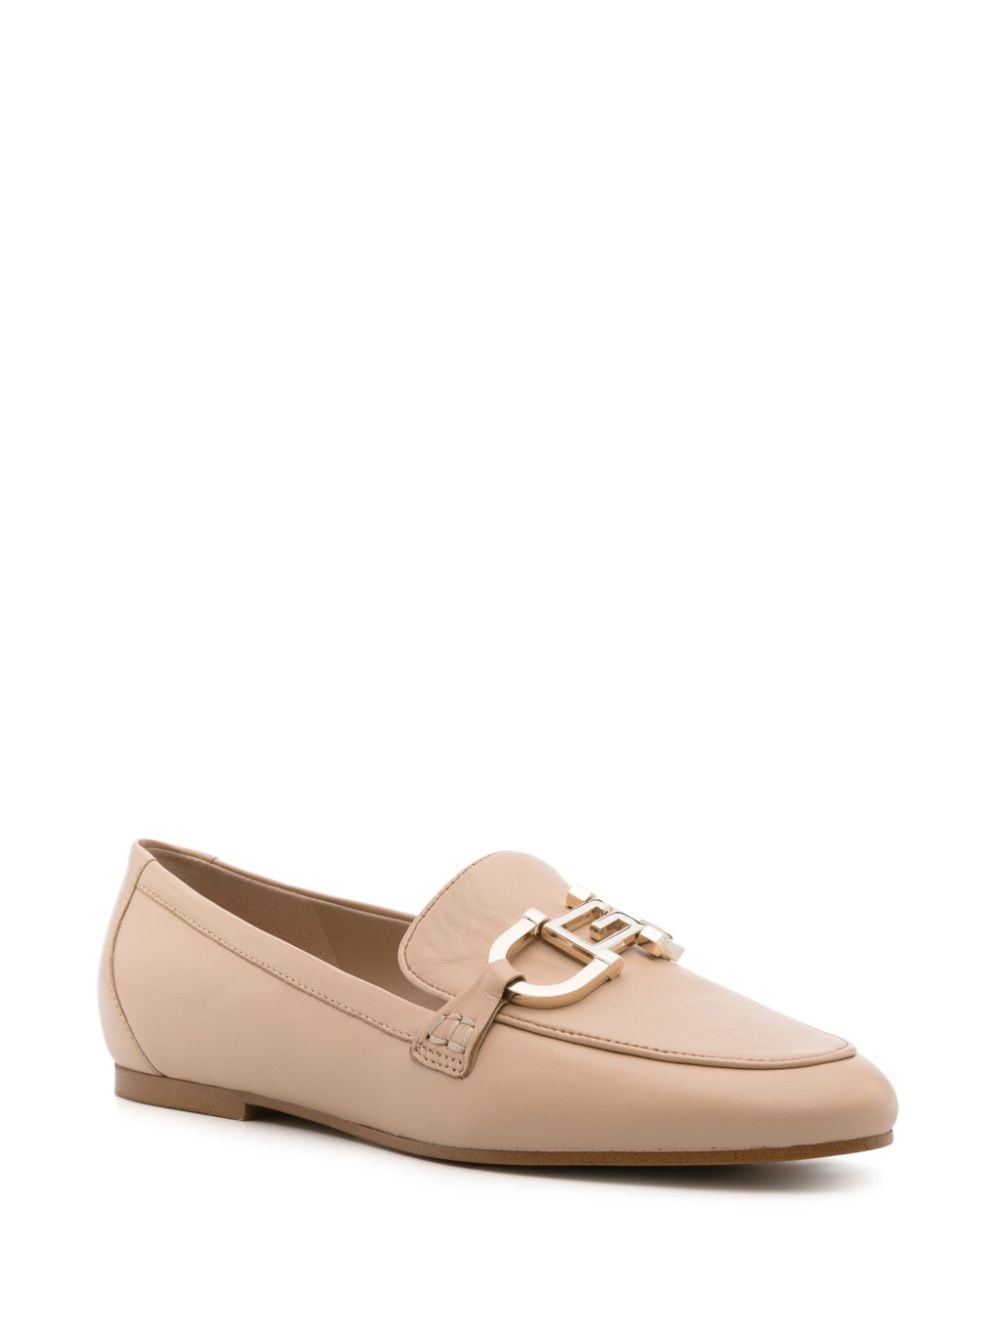 GUESS USA Isaac leather loafers - Beige